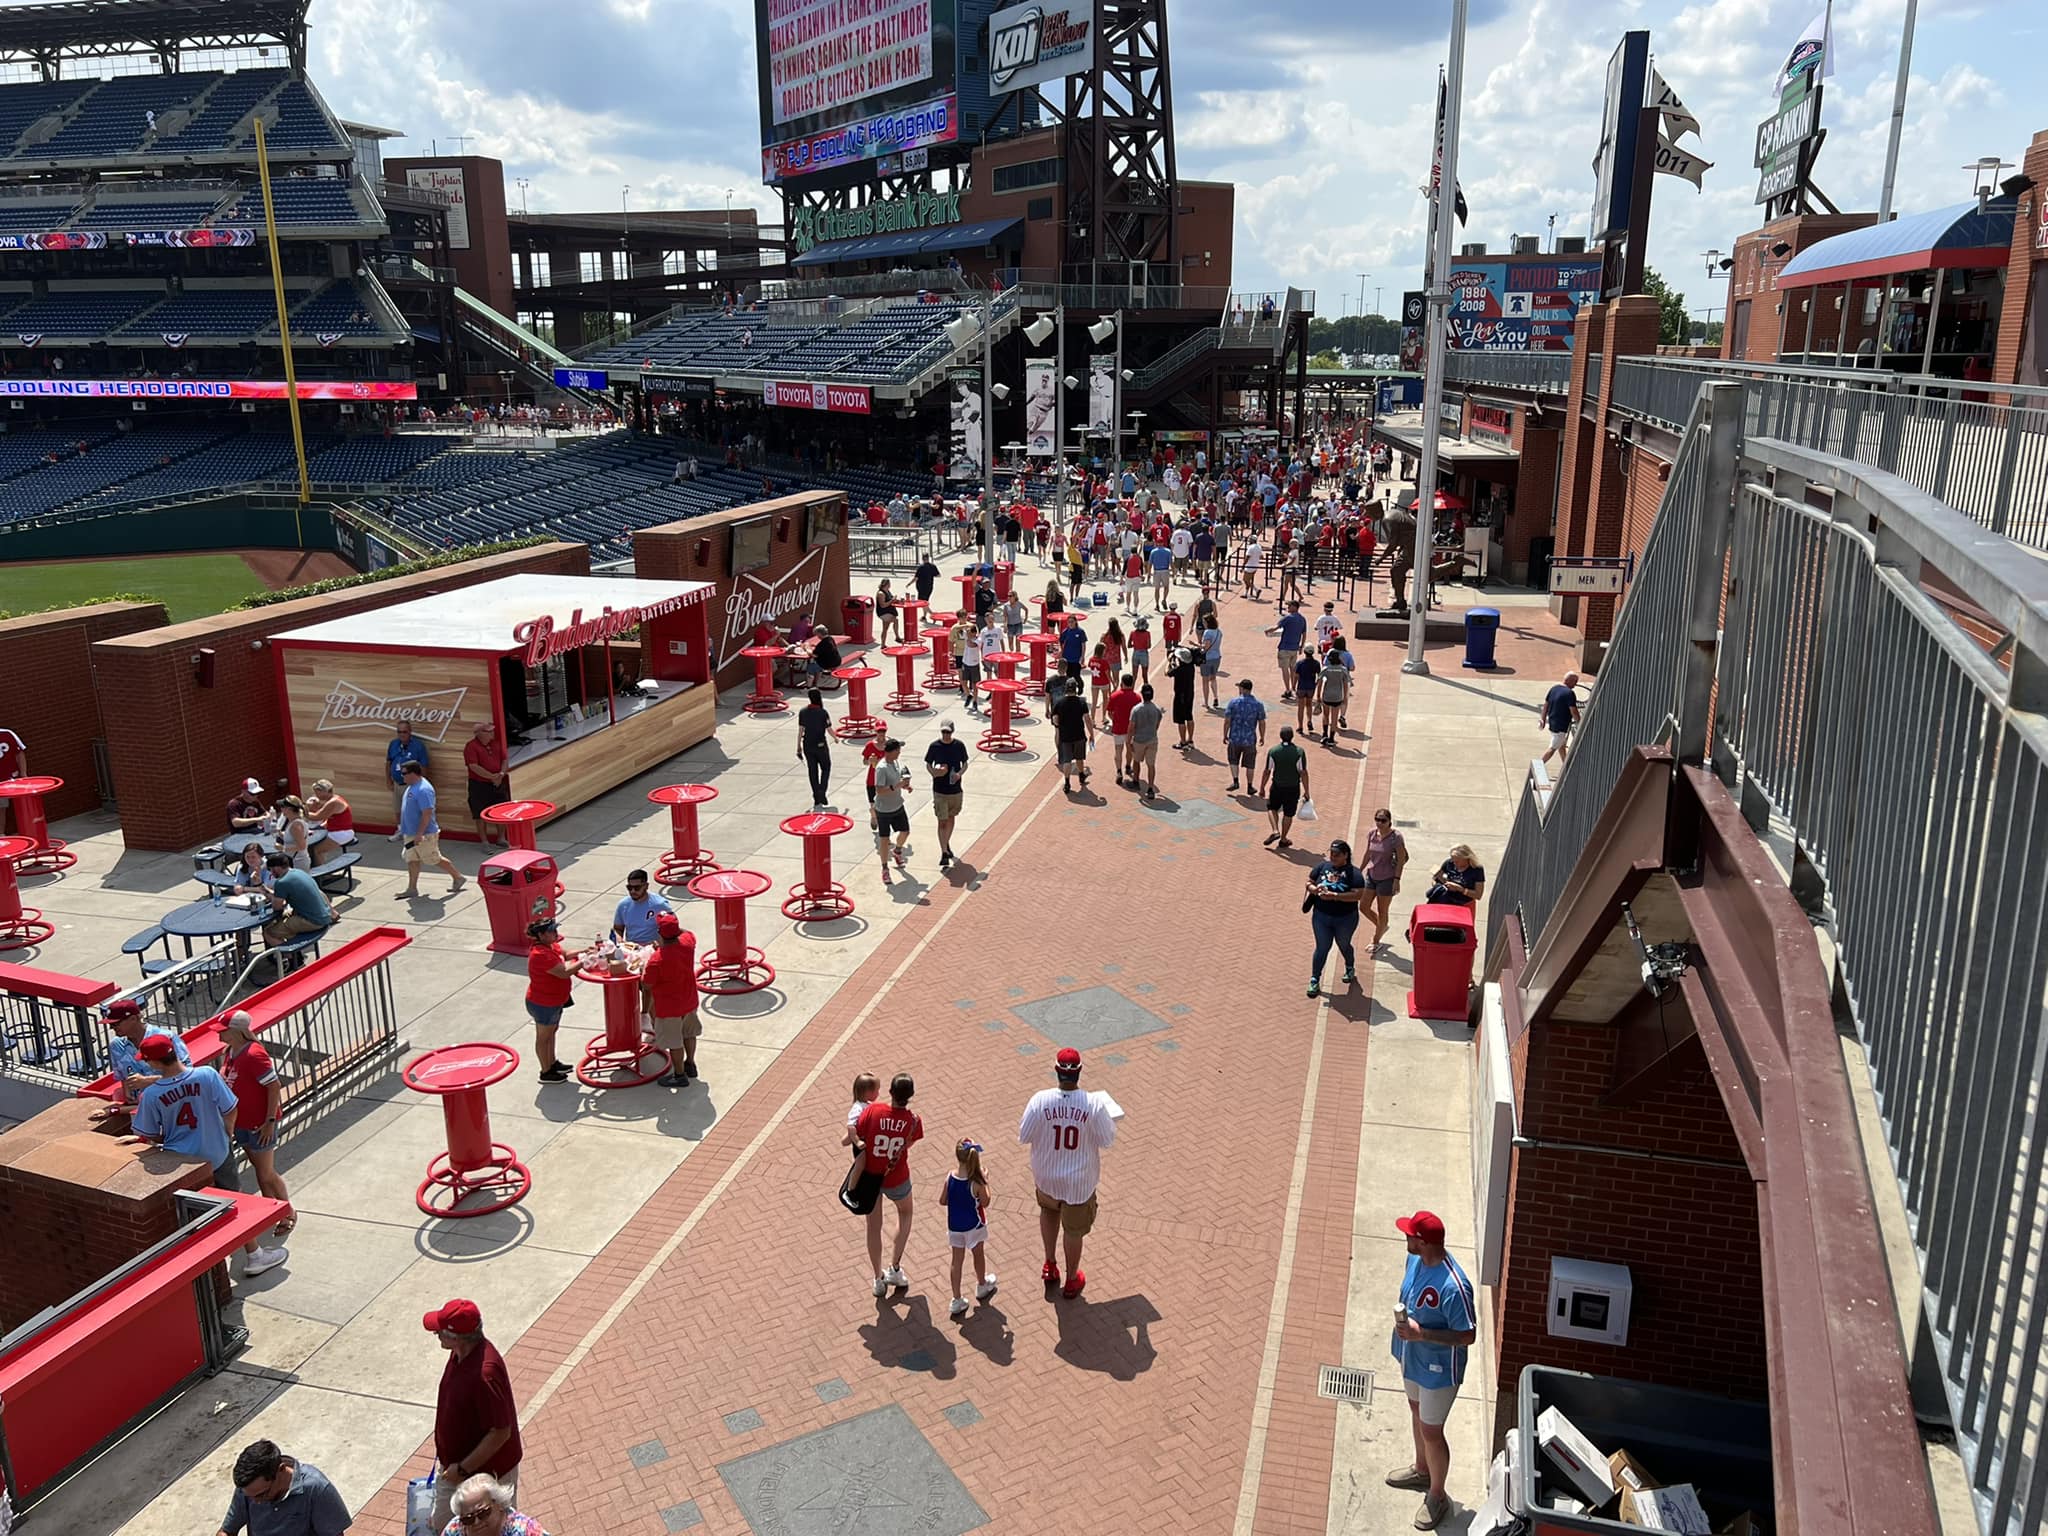 Ranking the best items to buy at Citizens Bank Park this season